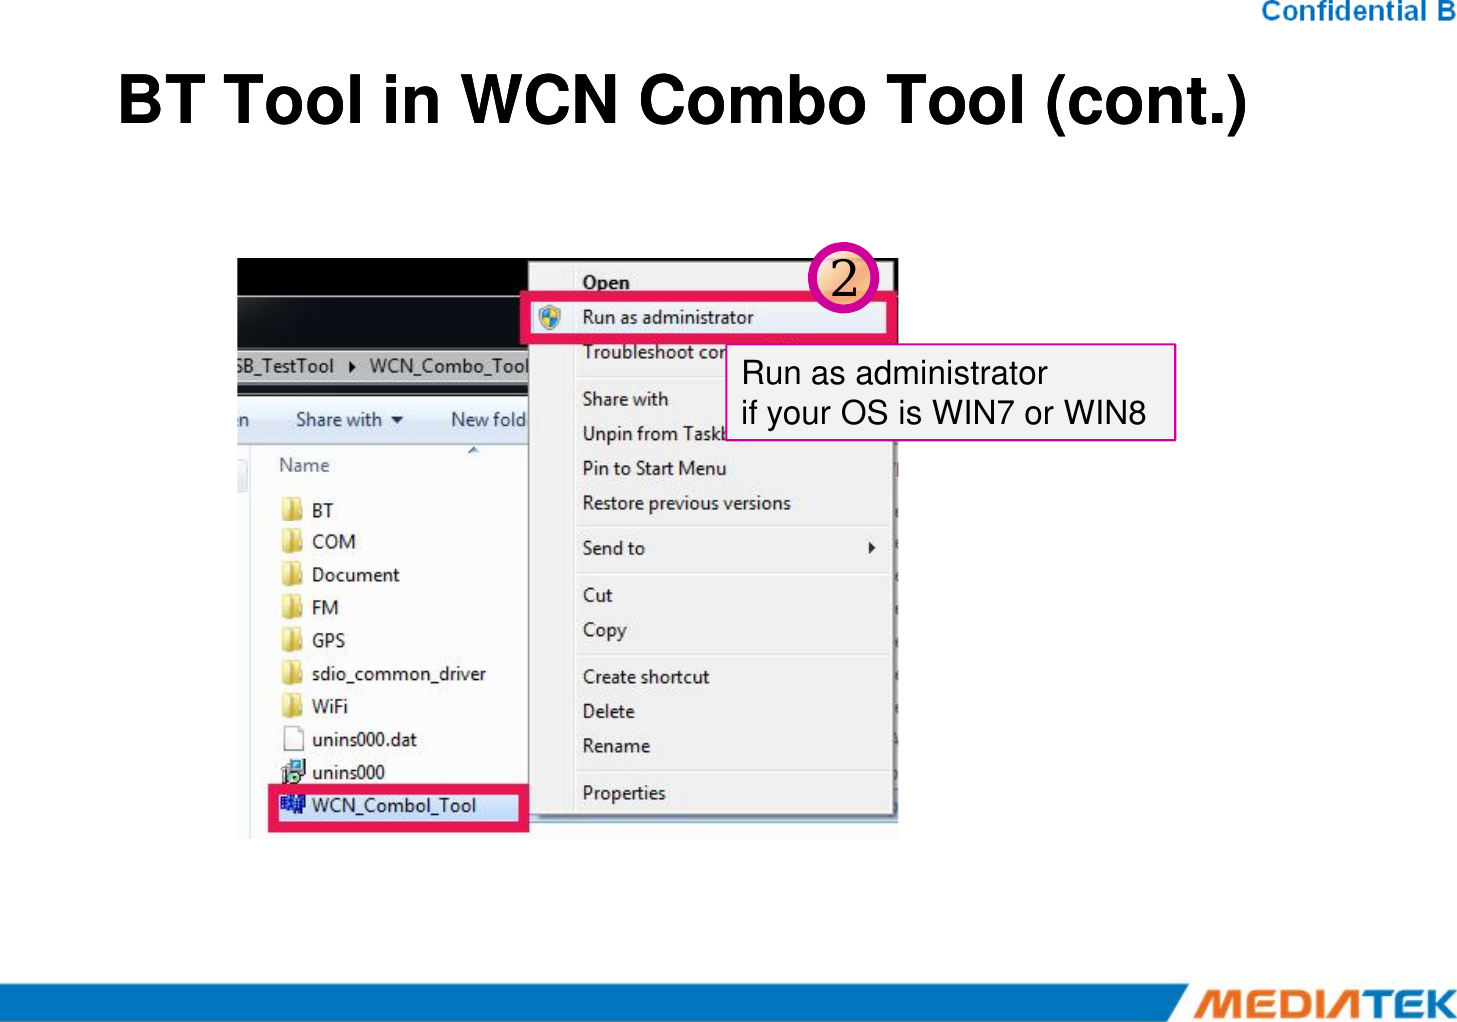 BT Tool in WCN Combo Tool (cont.)BT Tool in WCN Combo Tool (cont.)2Run as administrator if your OS is WIN7 or WIN8